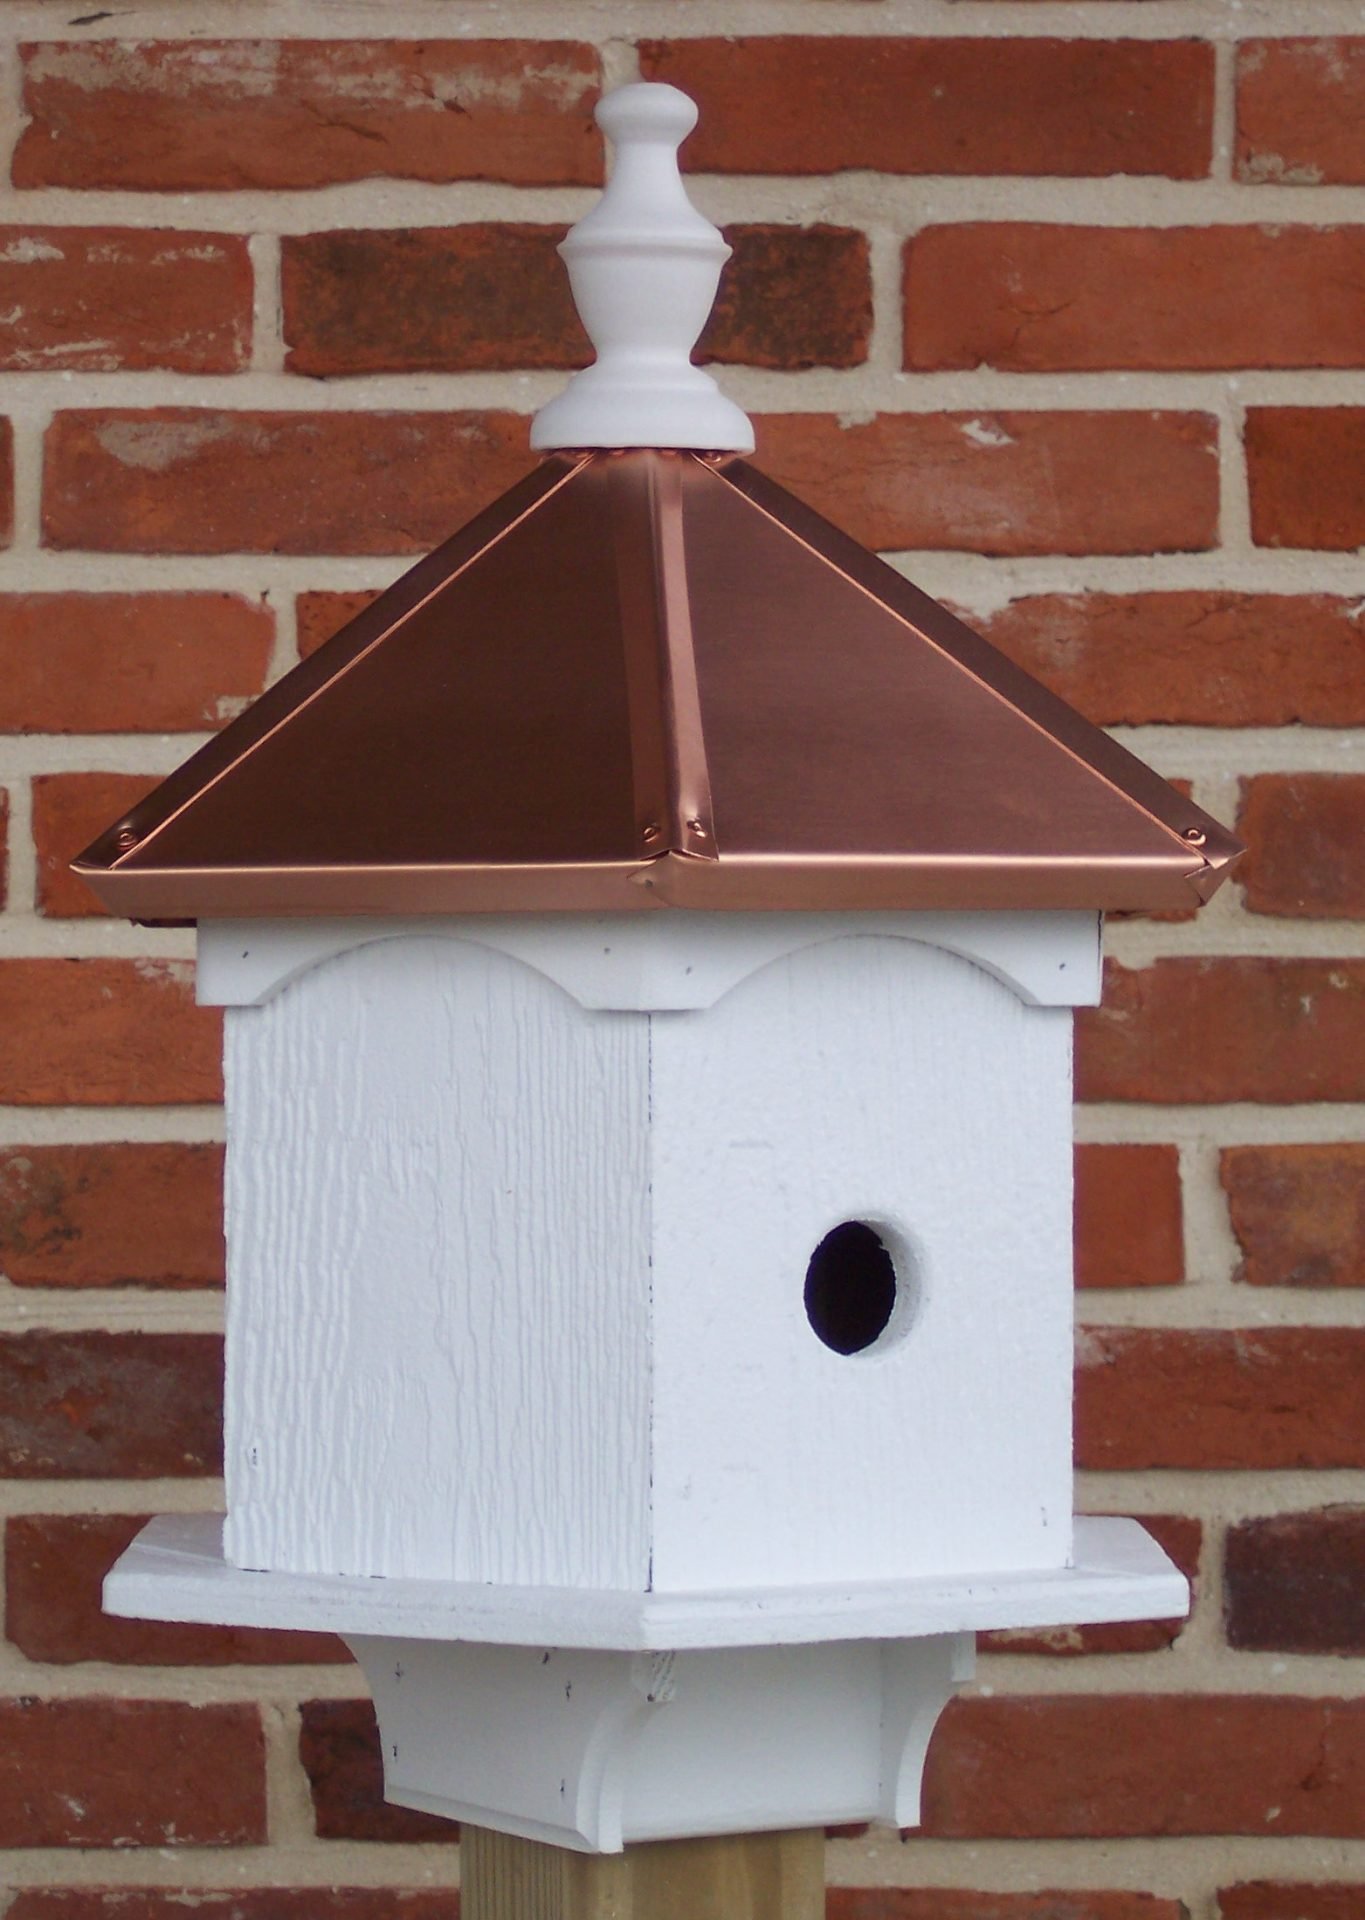 Double Sided 2 Hole Bird House with Polished Copper Roof - 20 inches Tall